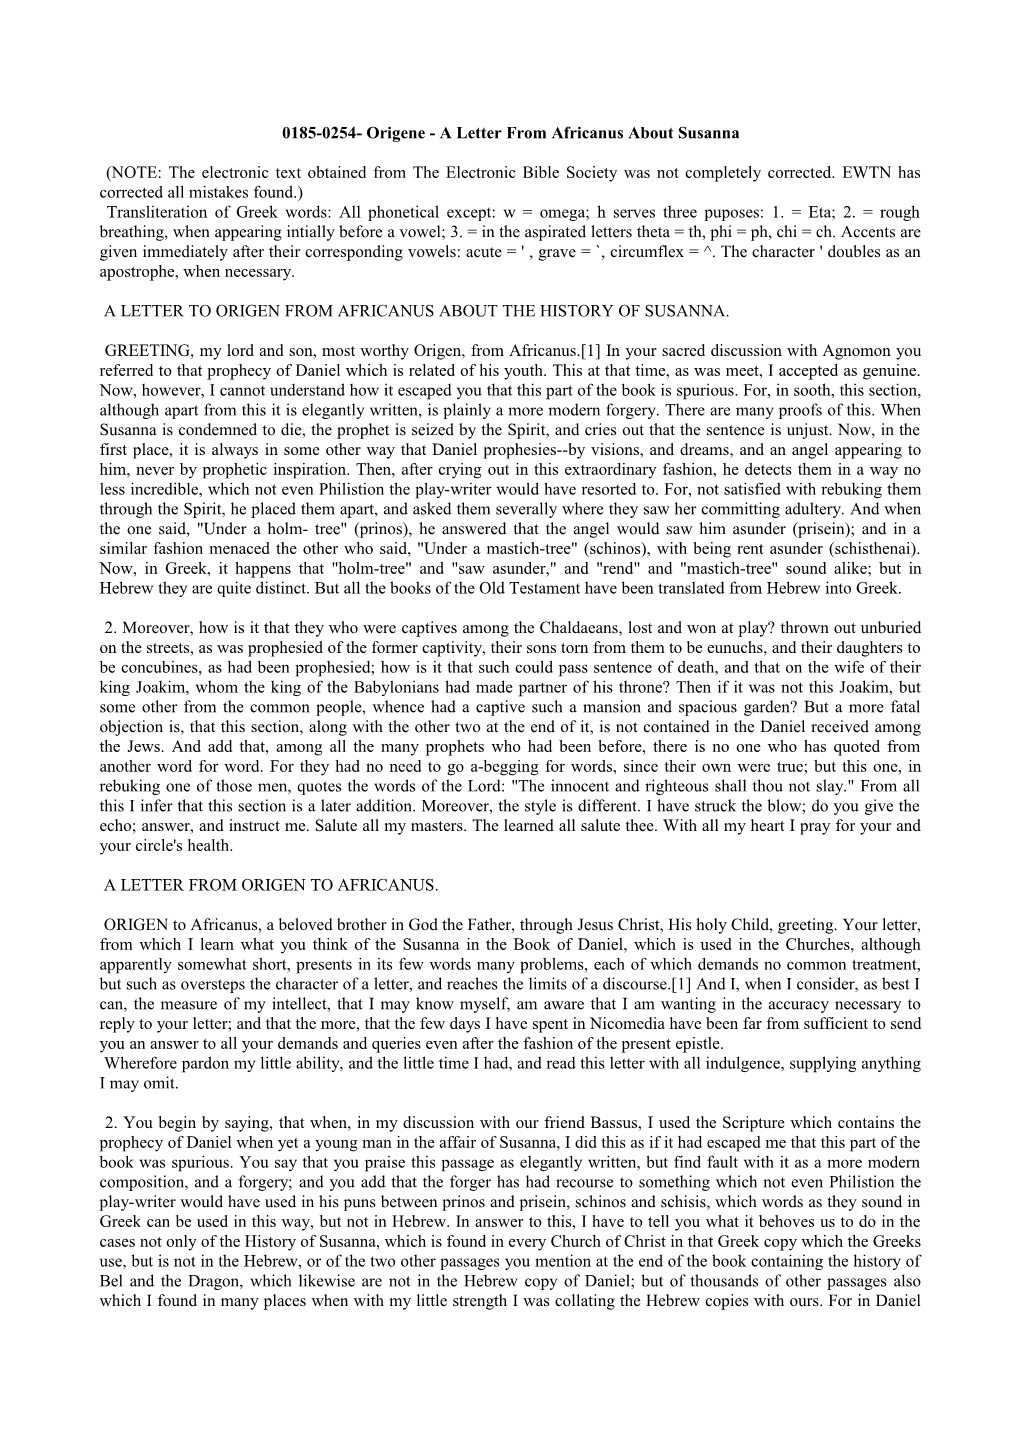 0185-0254- Origene - a Letter from Africanus About Susanna